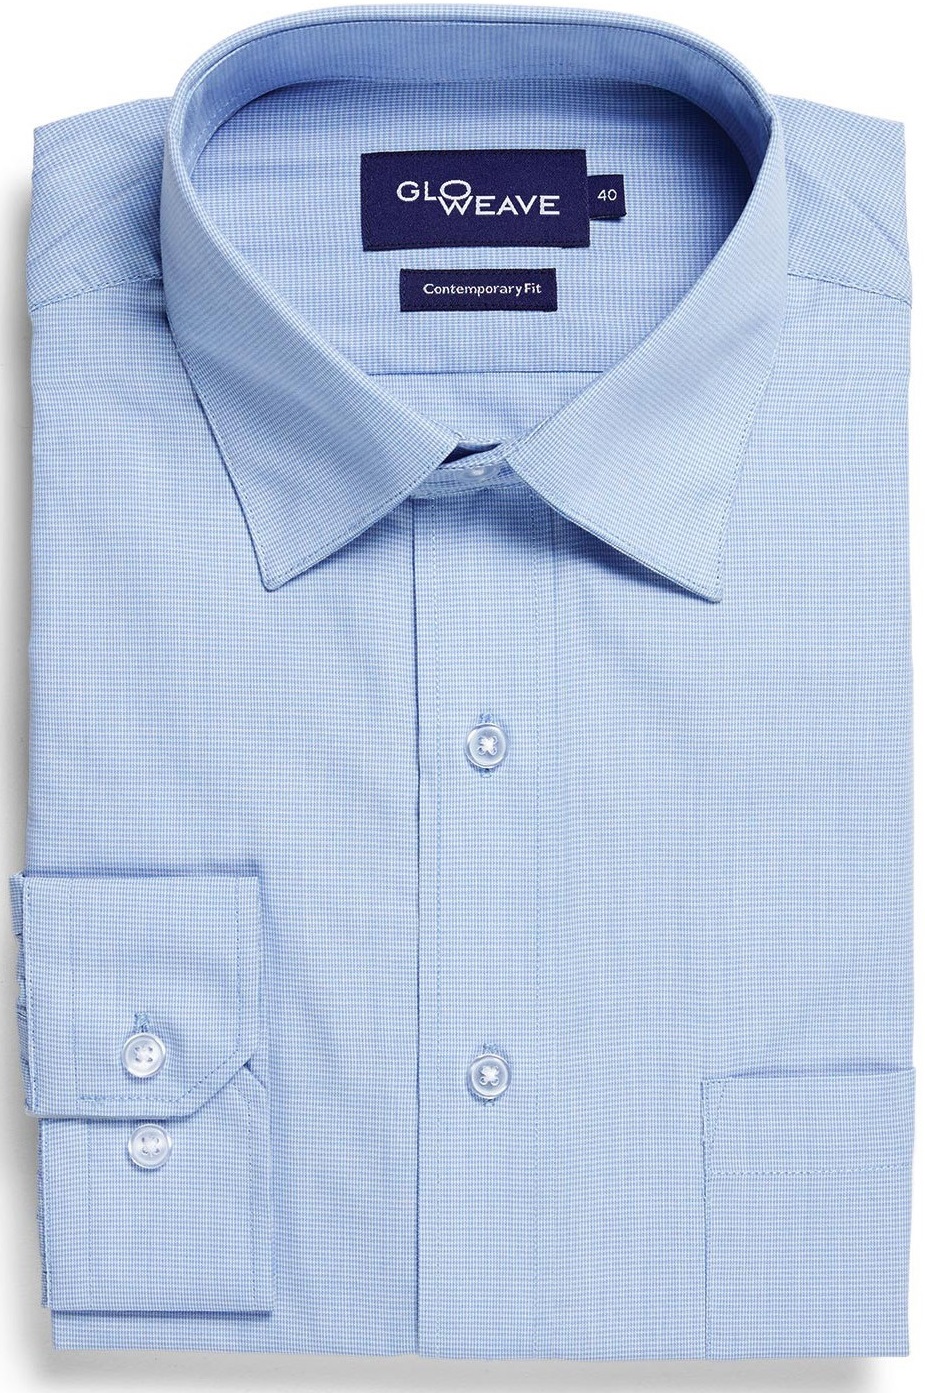 Business Shirts For Men | Mens Business Shirts Save up to 25%